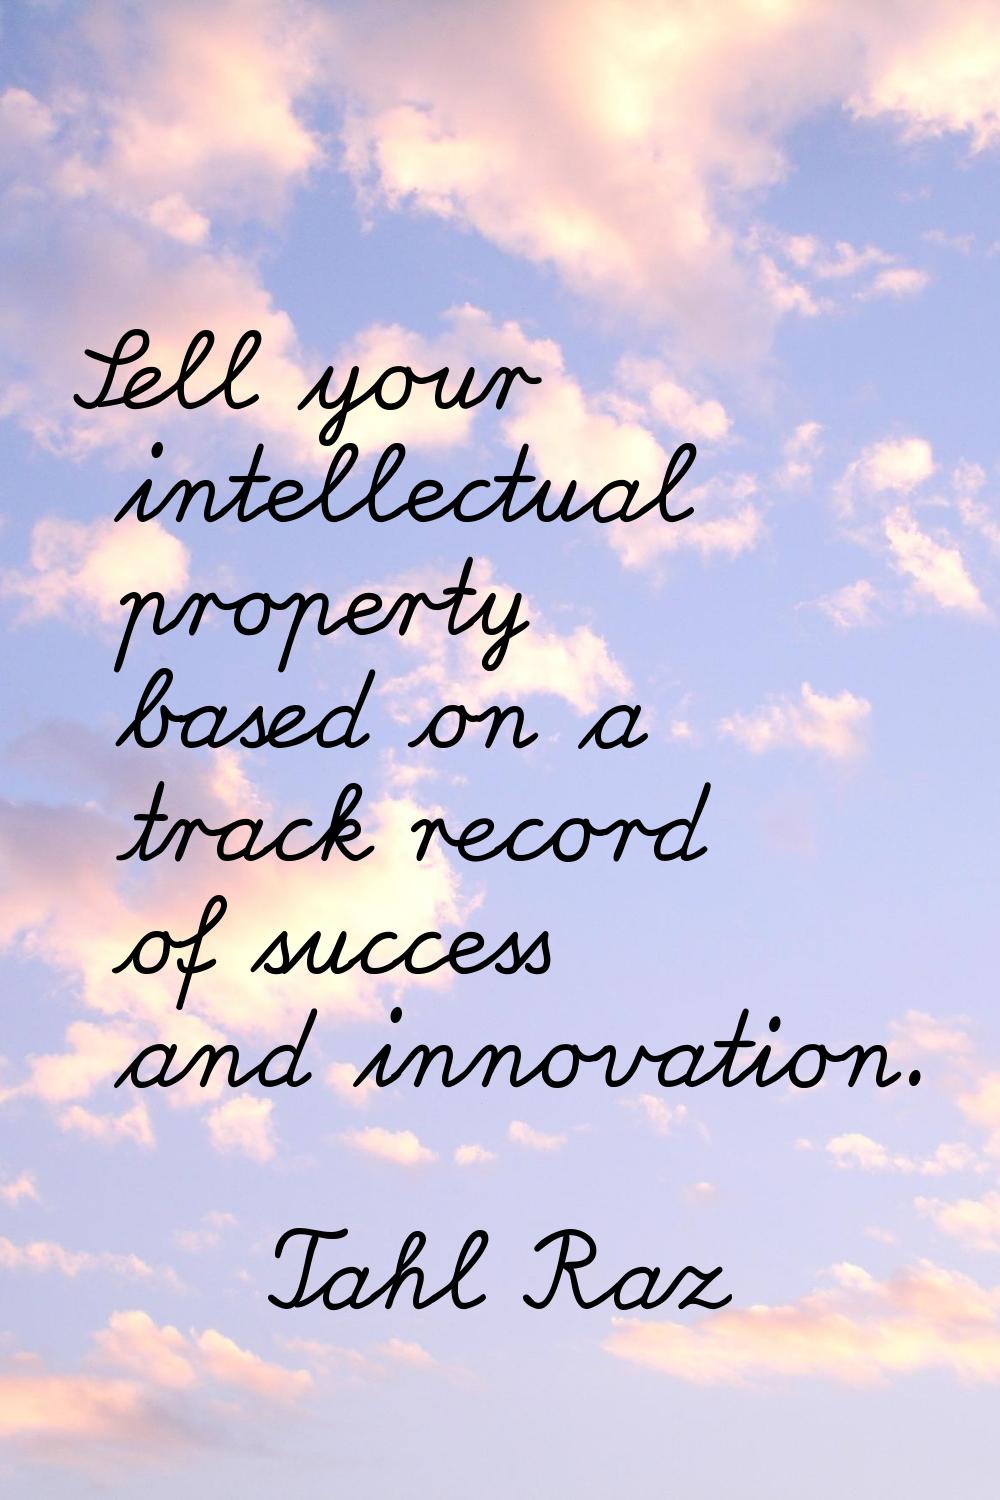 Sell your intellectual property based on a track record of success and innovation.